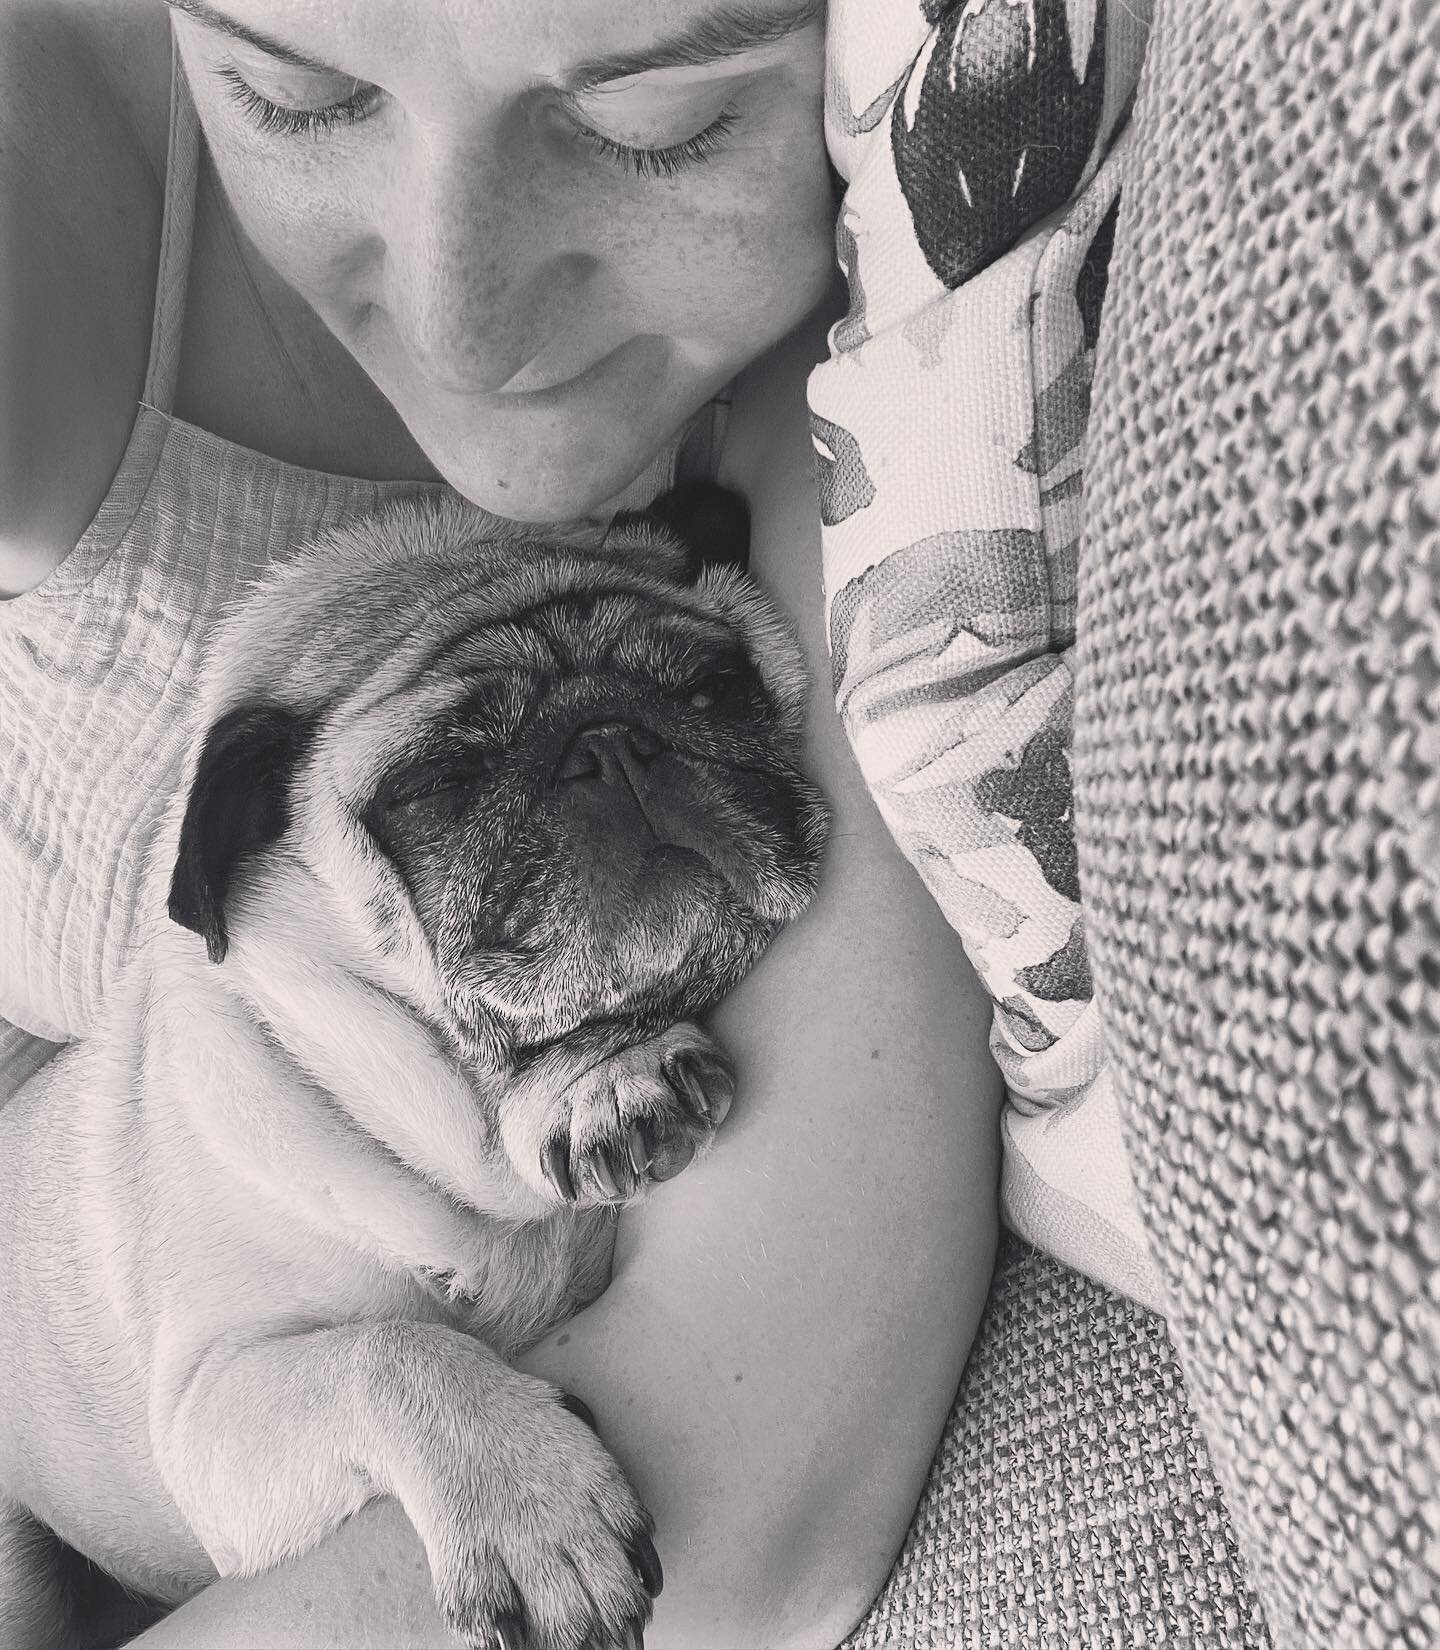 For 8 years you&rsquo;ve shared my Sunday afternoon snuggle spot ❤️

Here&rsquo;s to many more, my little bear. Happy Birthday Reginald 🐶🥳